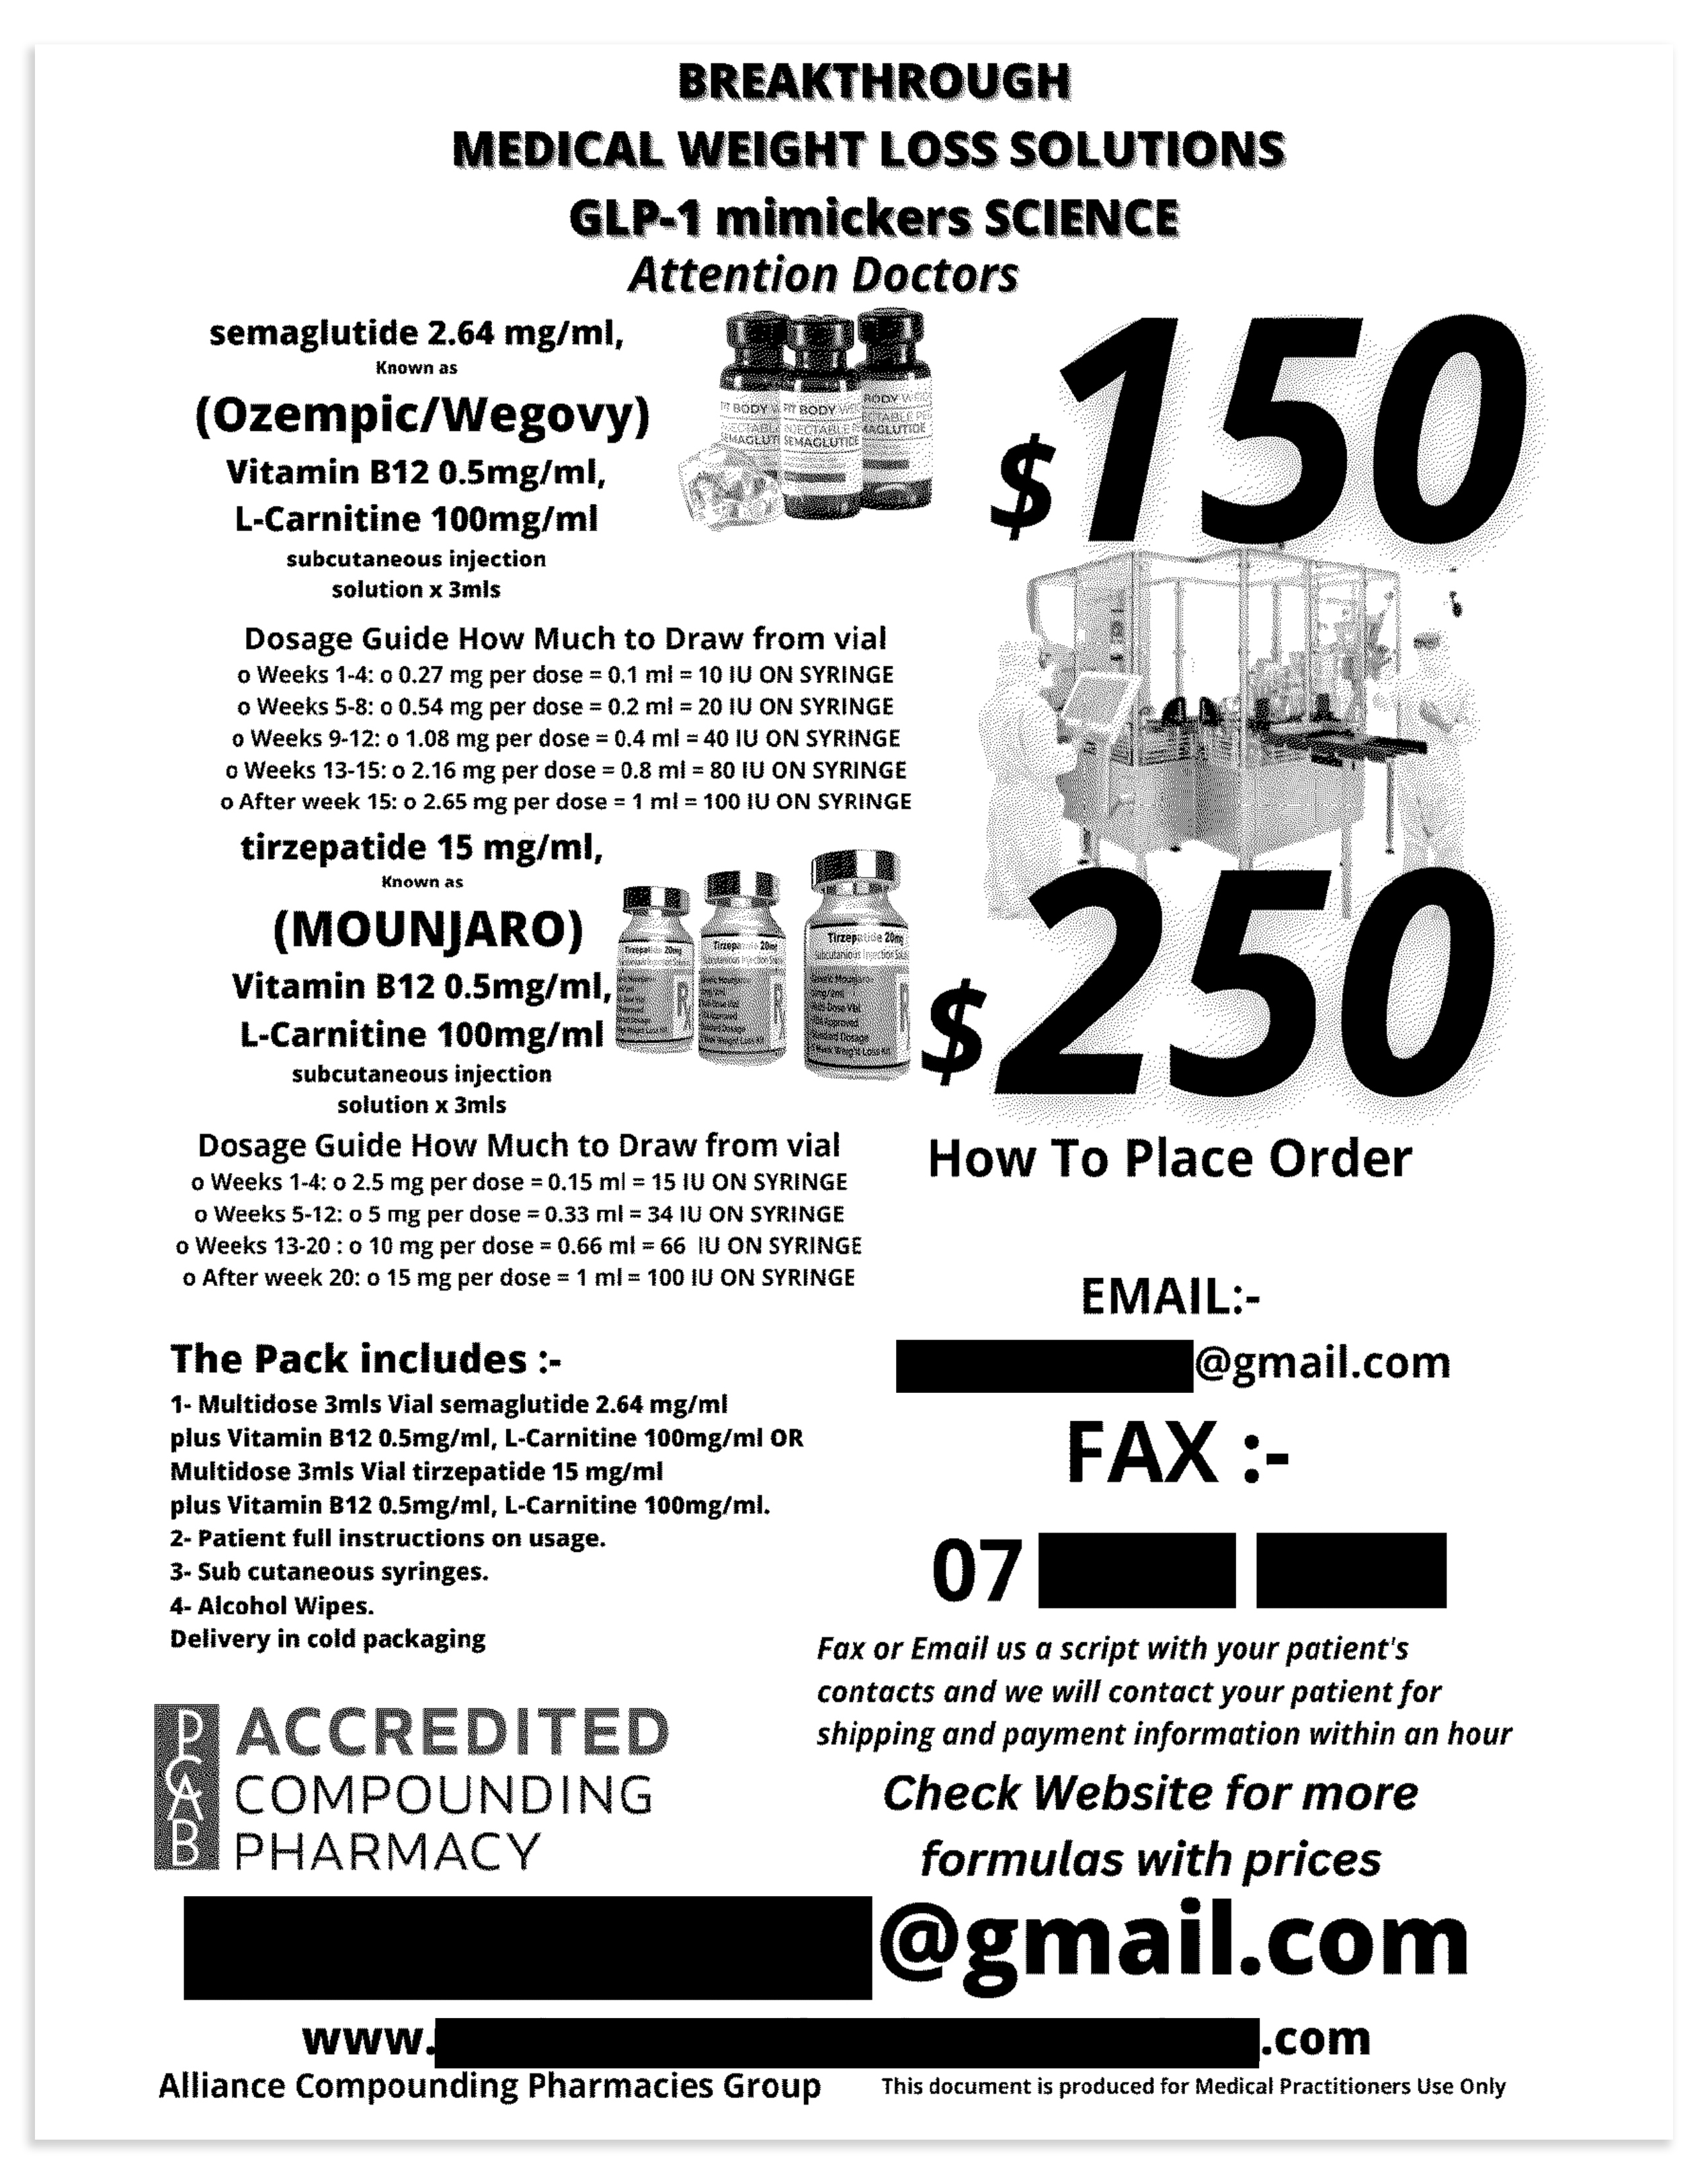 A black and white fax, advertising medication with the title "Breakthrough Medical Weight Loss Solutions".